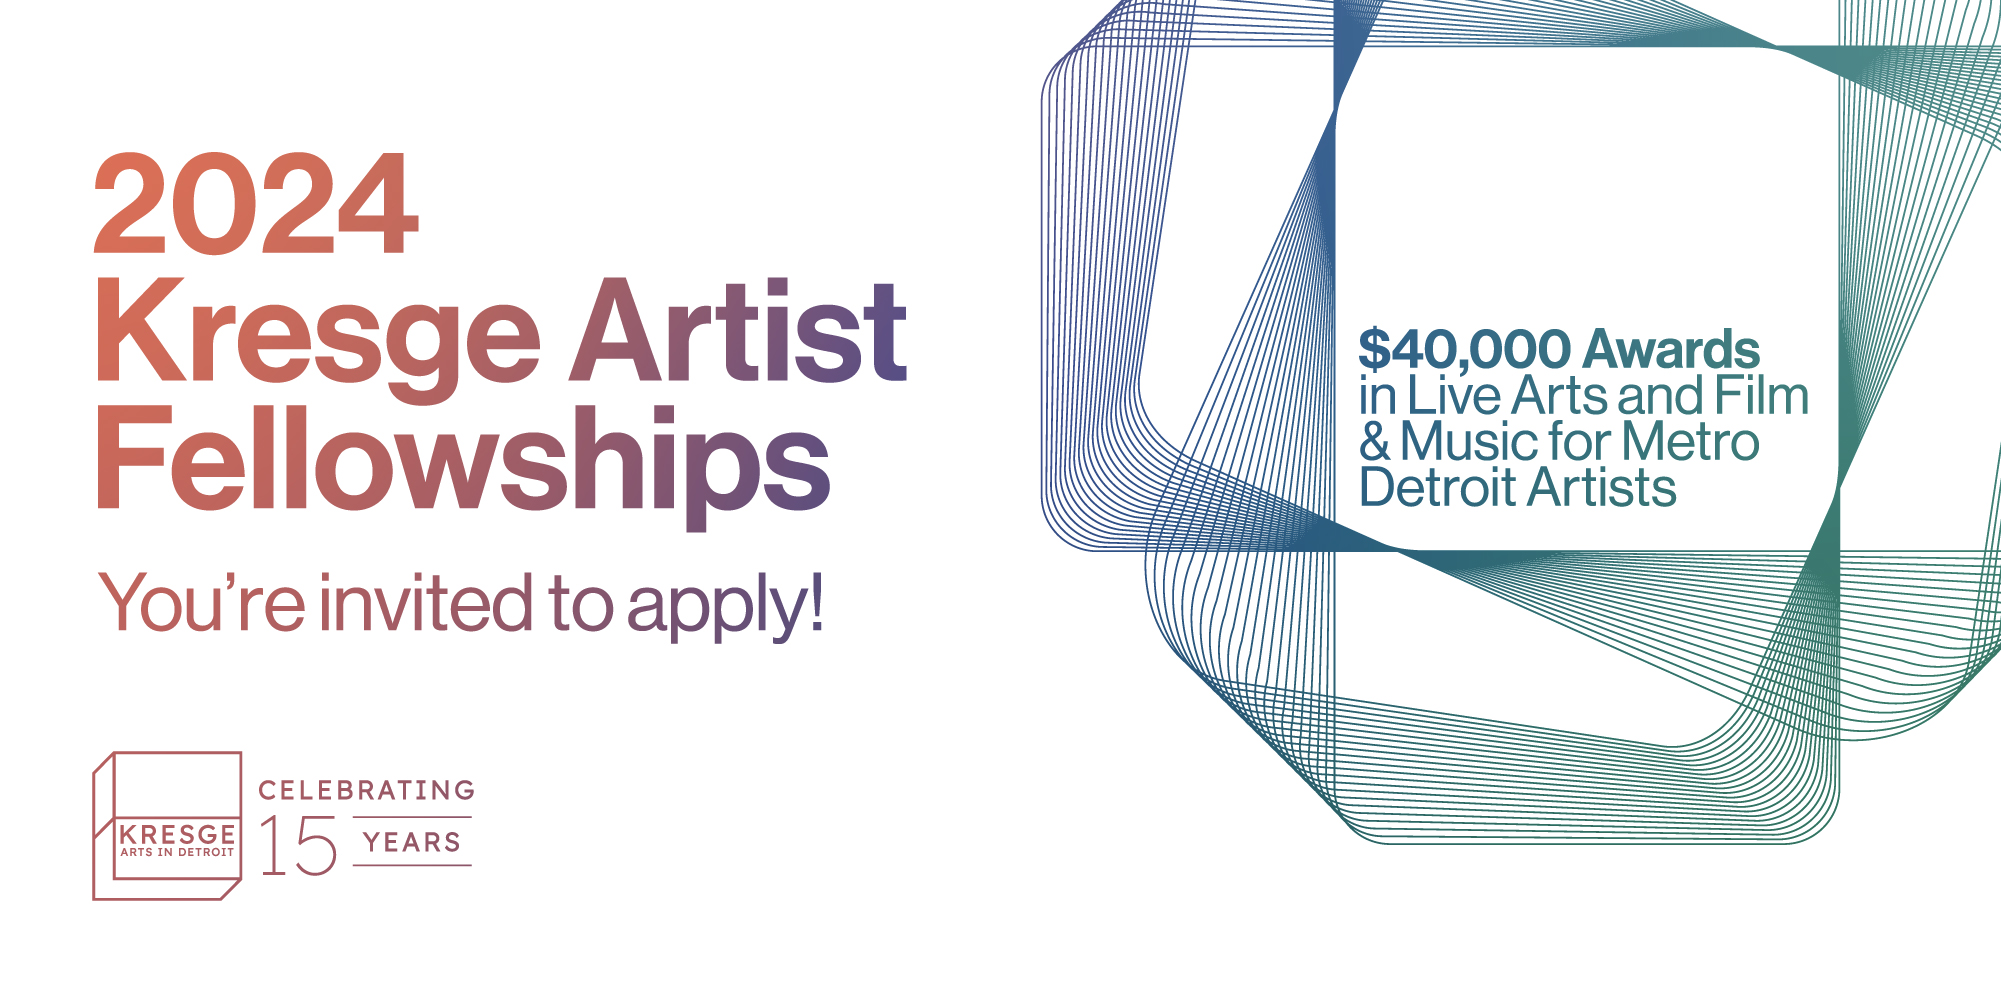 Promotional graphic for the 2024 Kresge Artist Fellowships application cycle